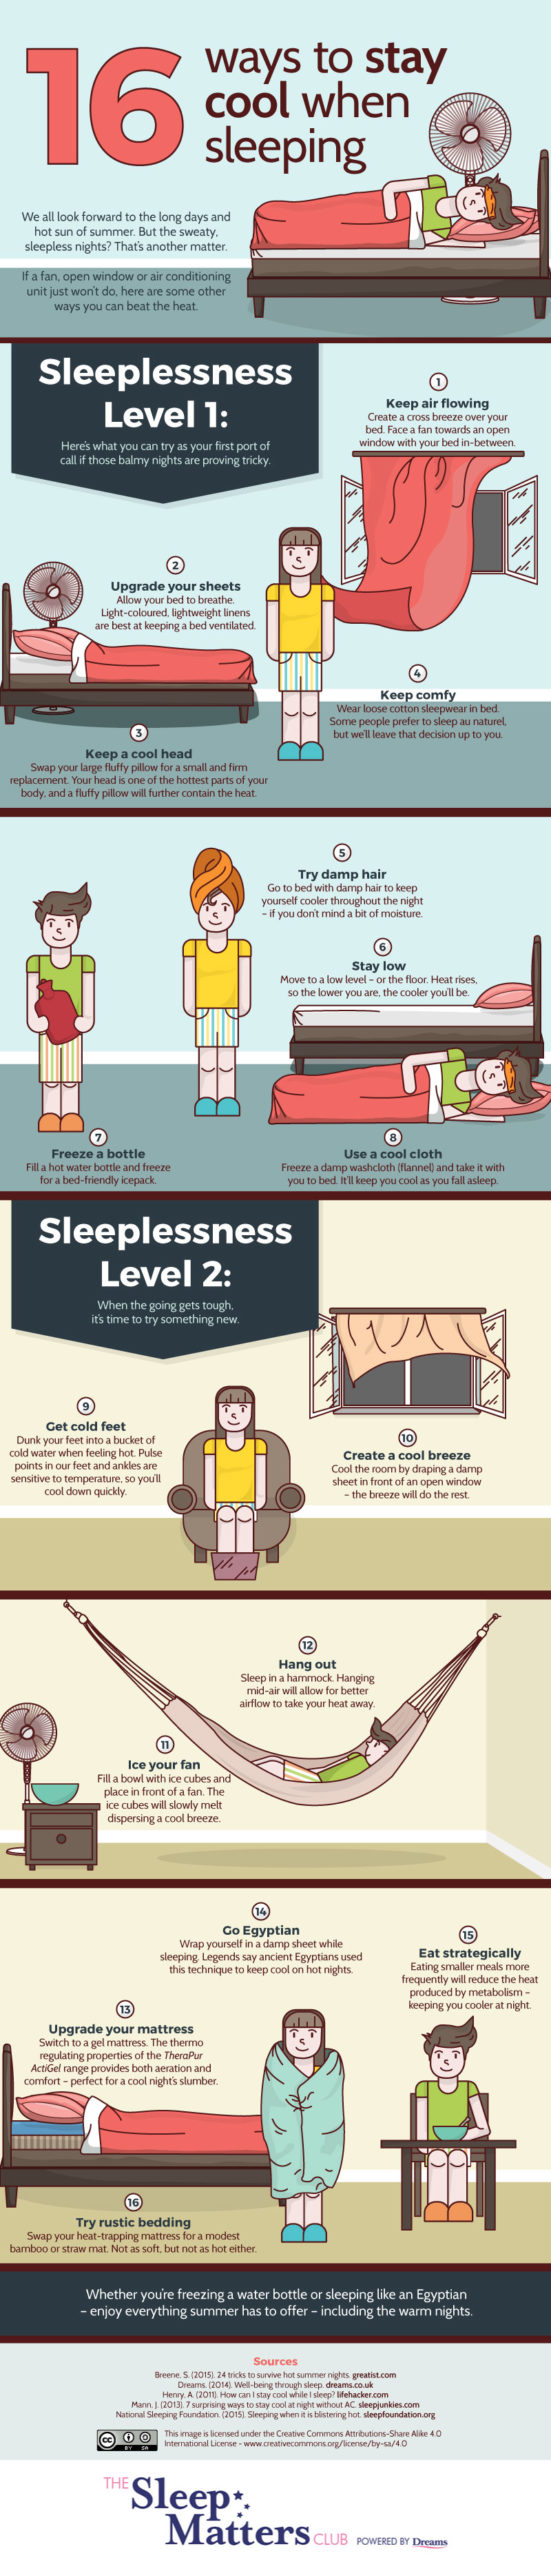 How To Stay Cool While You Sleep [Infographic]